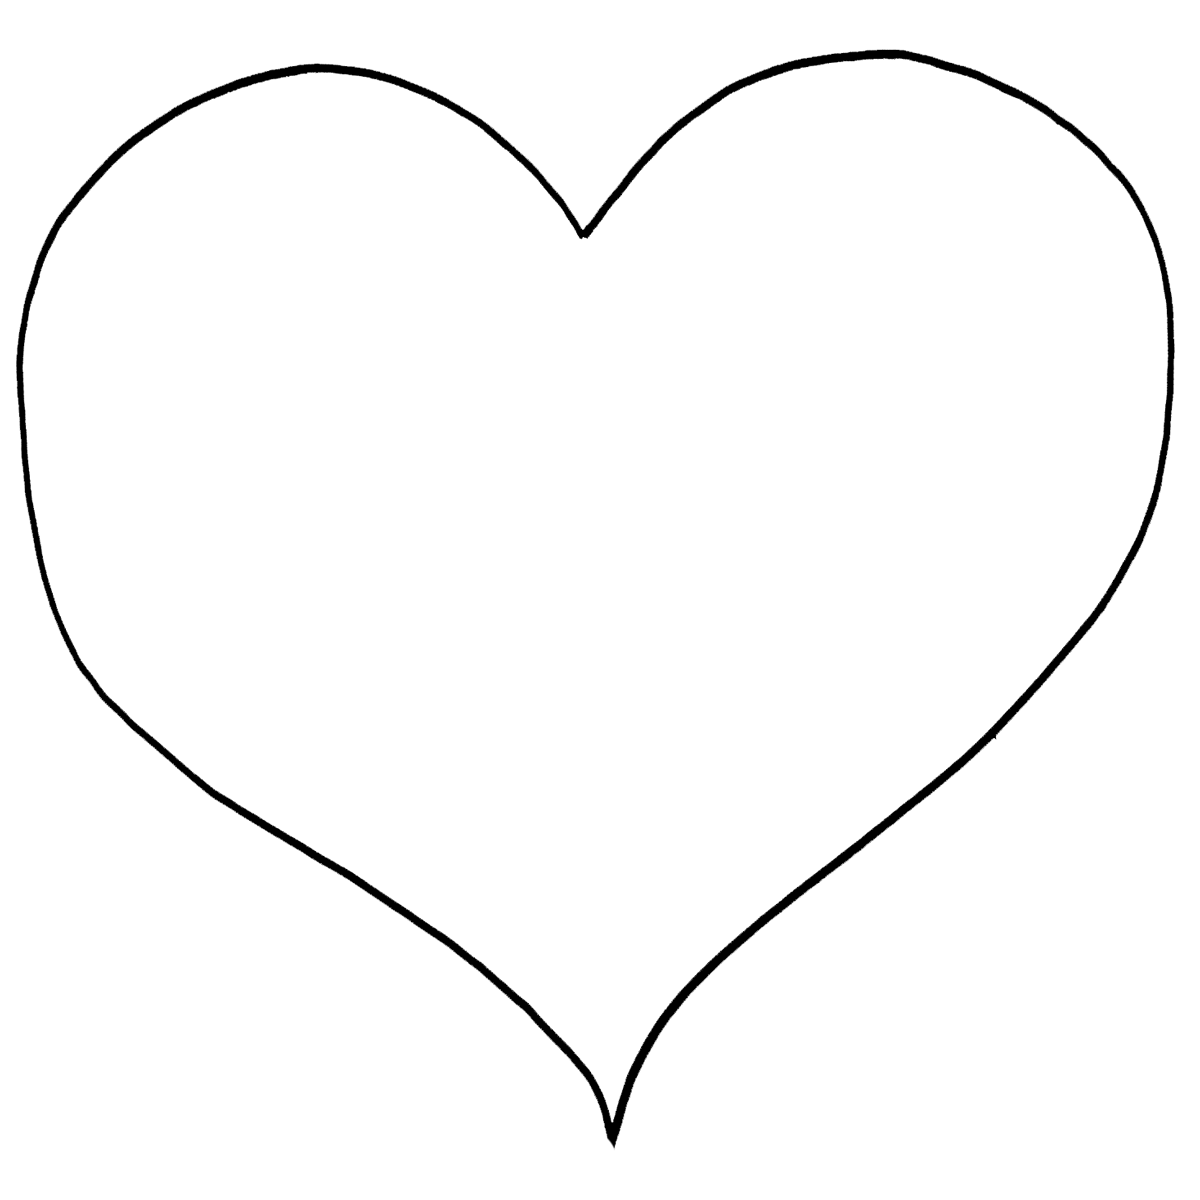 Heart Shape Coloring Page1